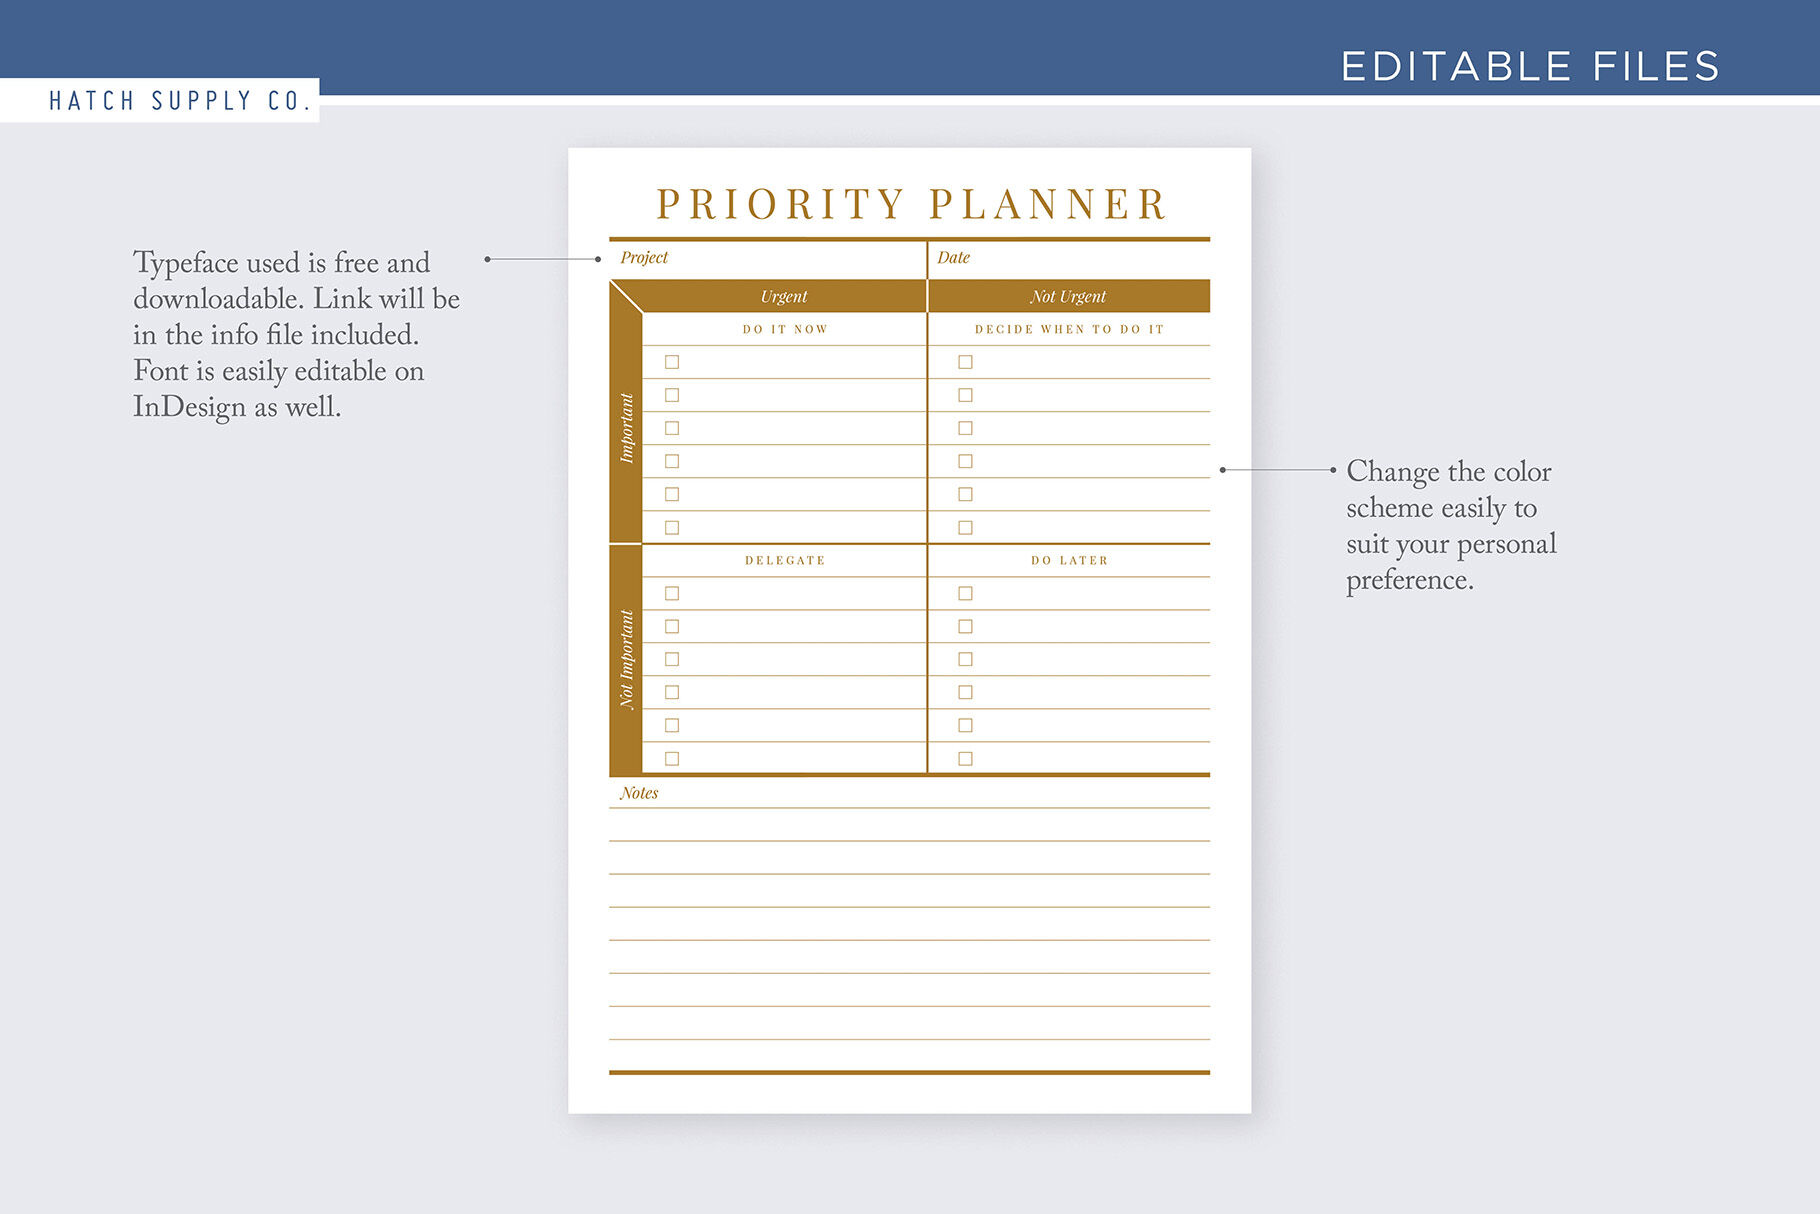 Moxie Priority Planner By Hatch Supply Co Thehungryjpeg Com